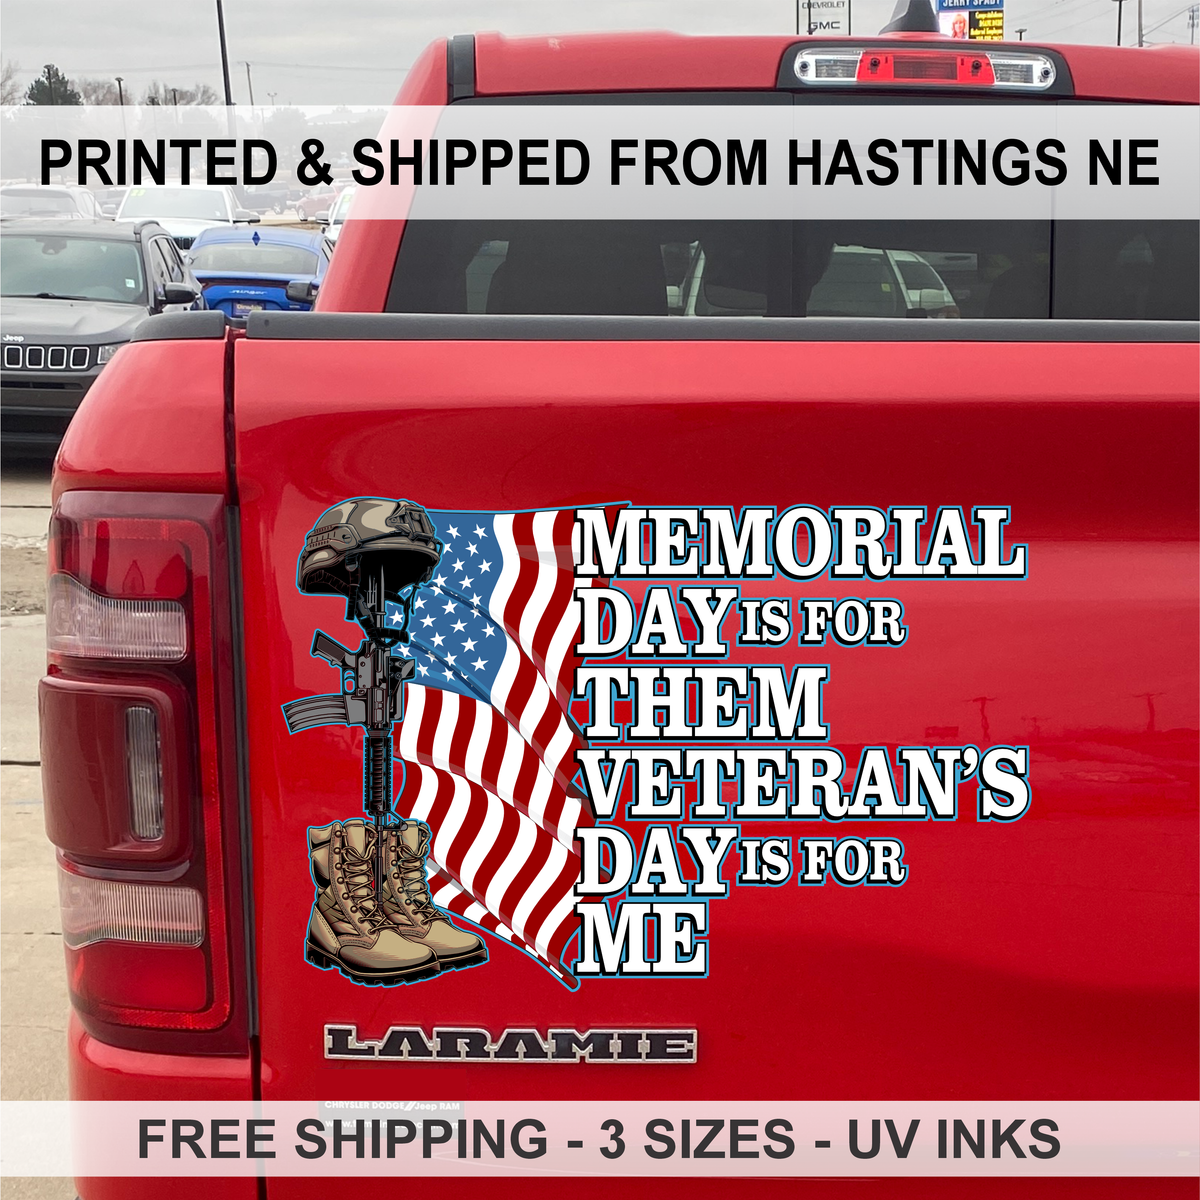 Memorial Day is for Them - Veteran's Day is for Me - PermaSticker - - Free Shipping - Application Video in Description